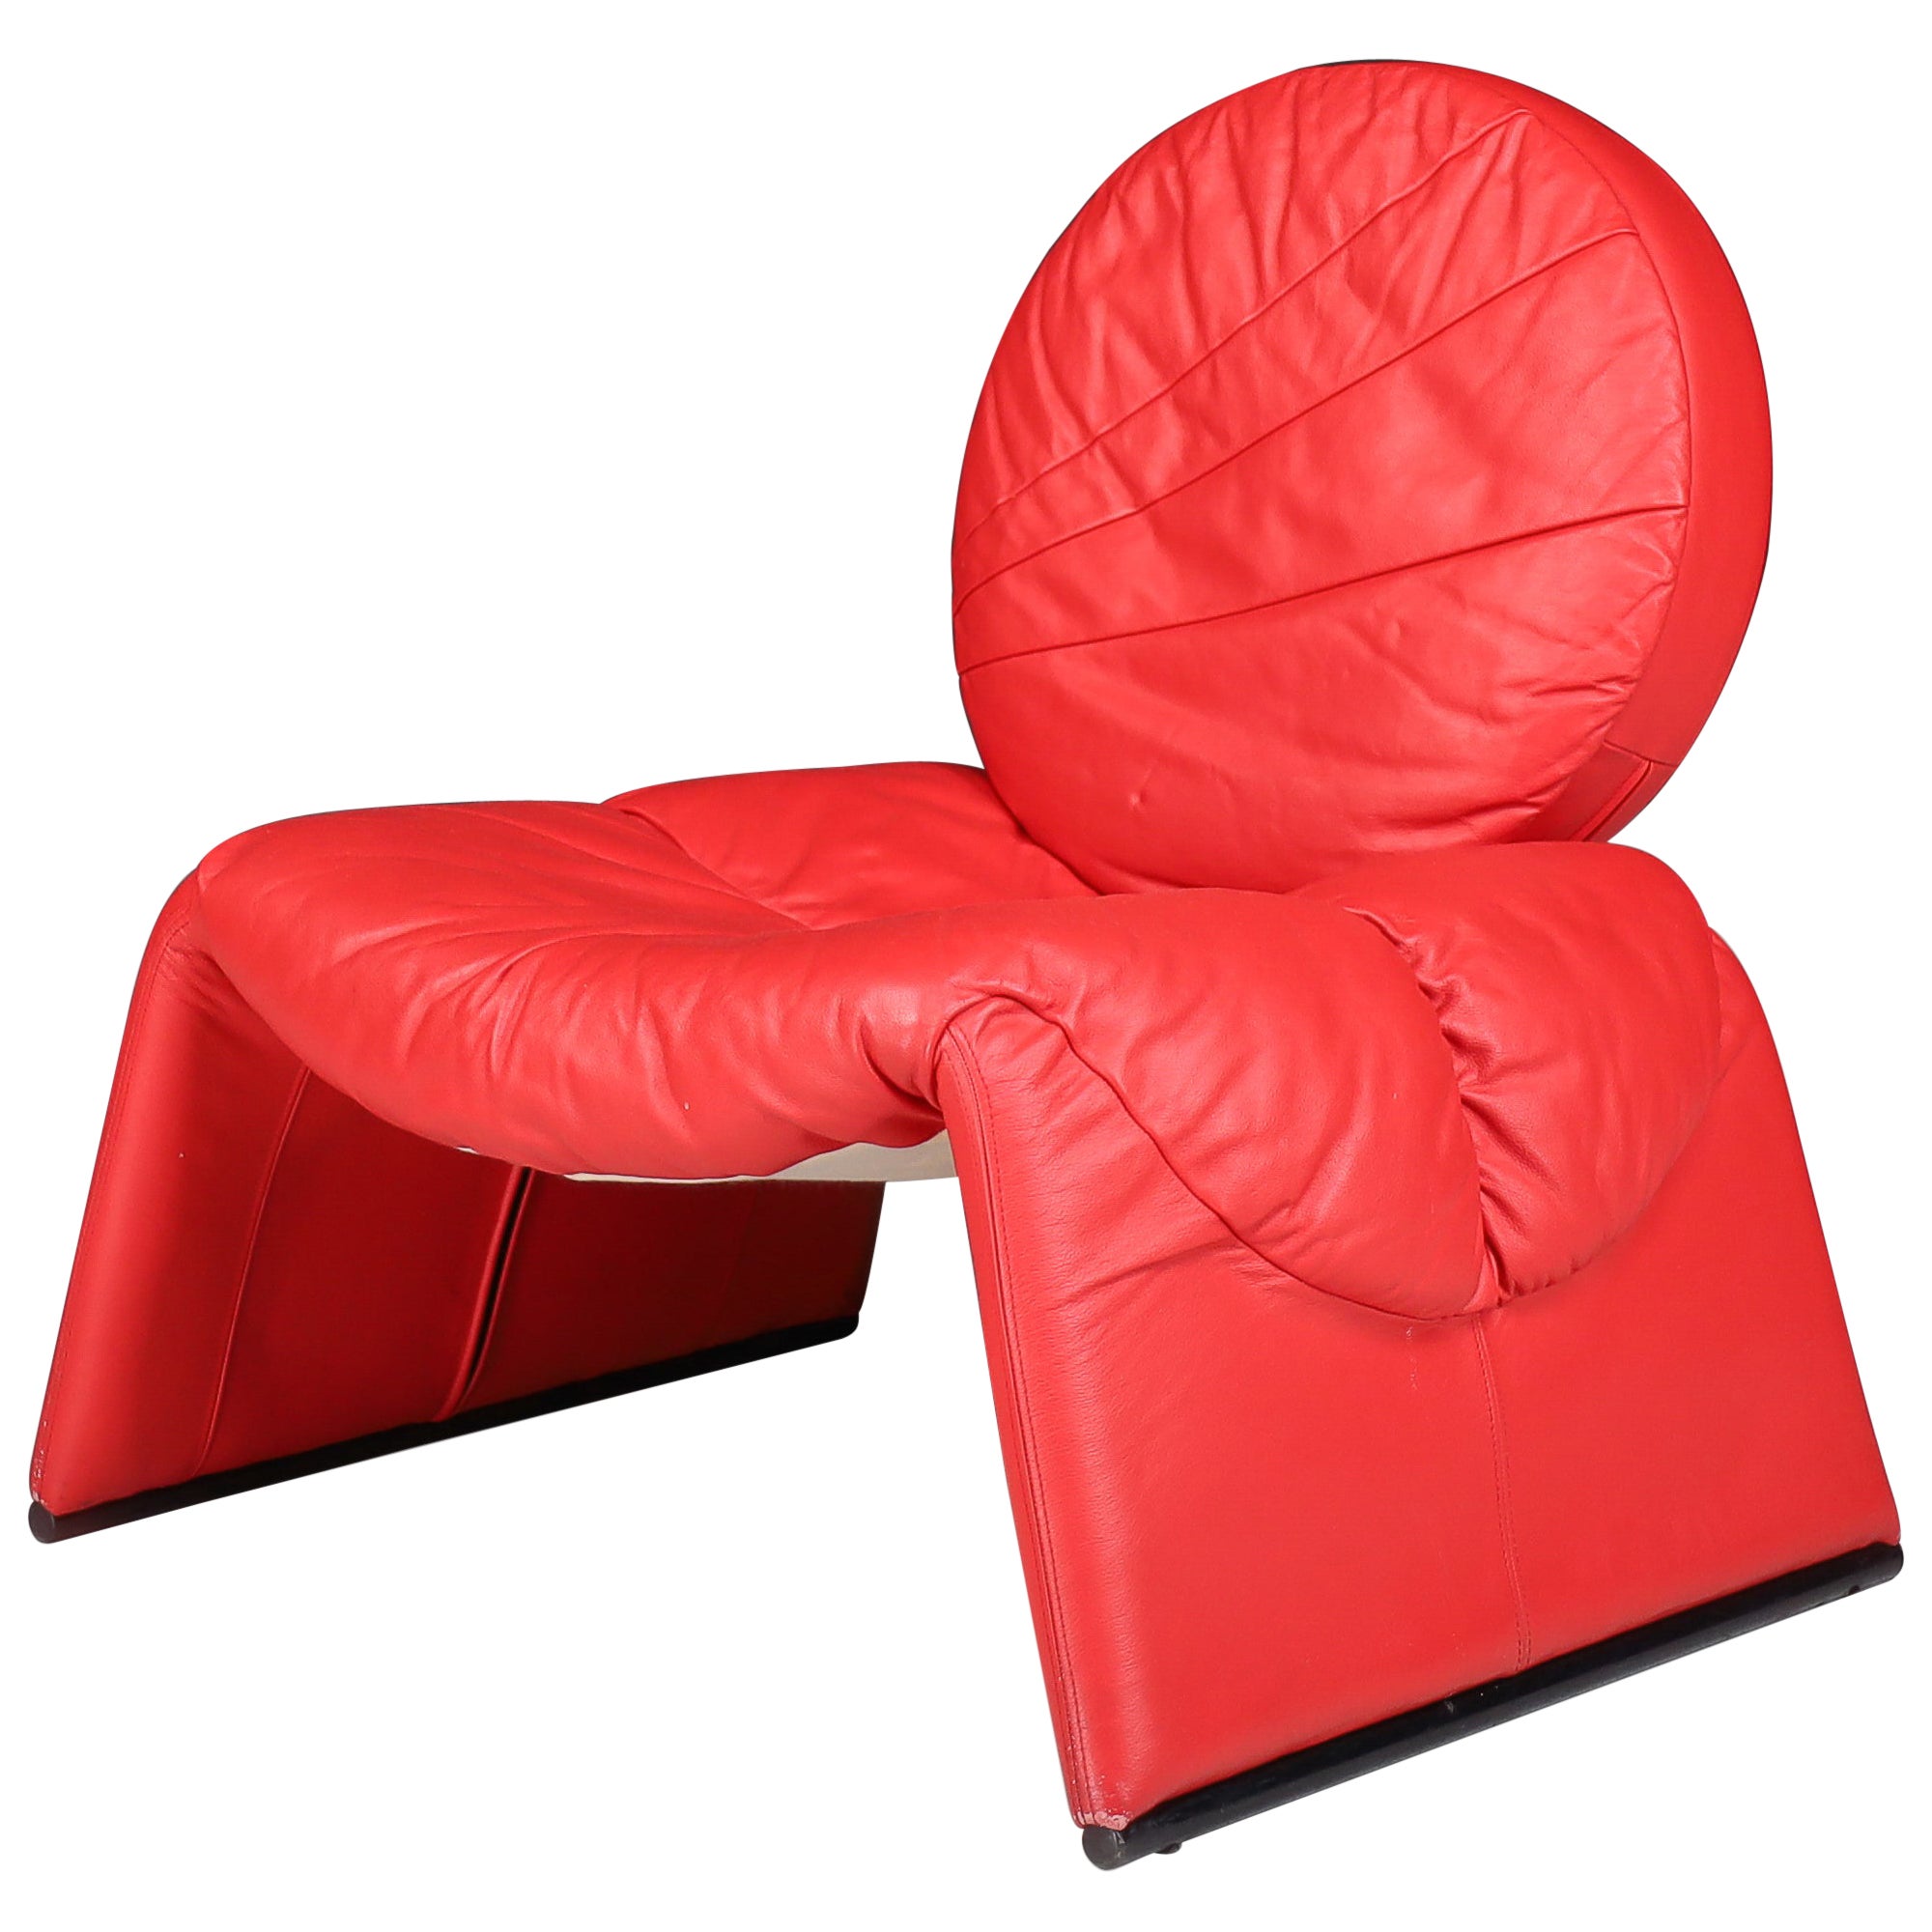 Vittorio Introini for Saporiti Italia Red Leather Lounge Chair, Italy, 1980s For Sale